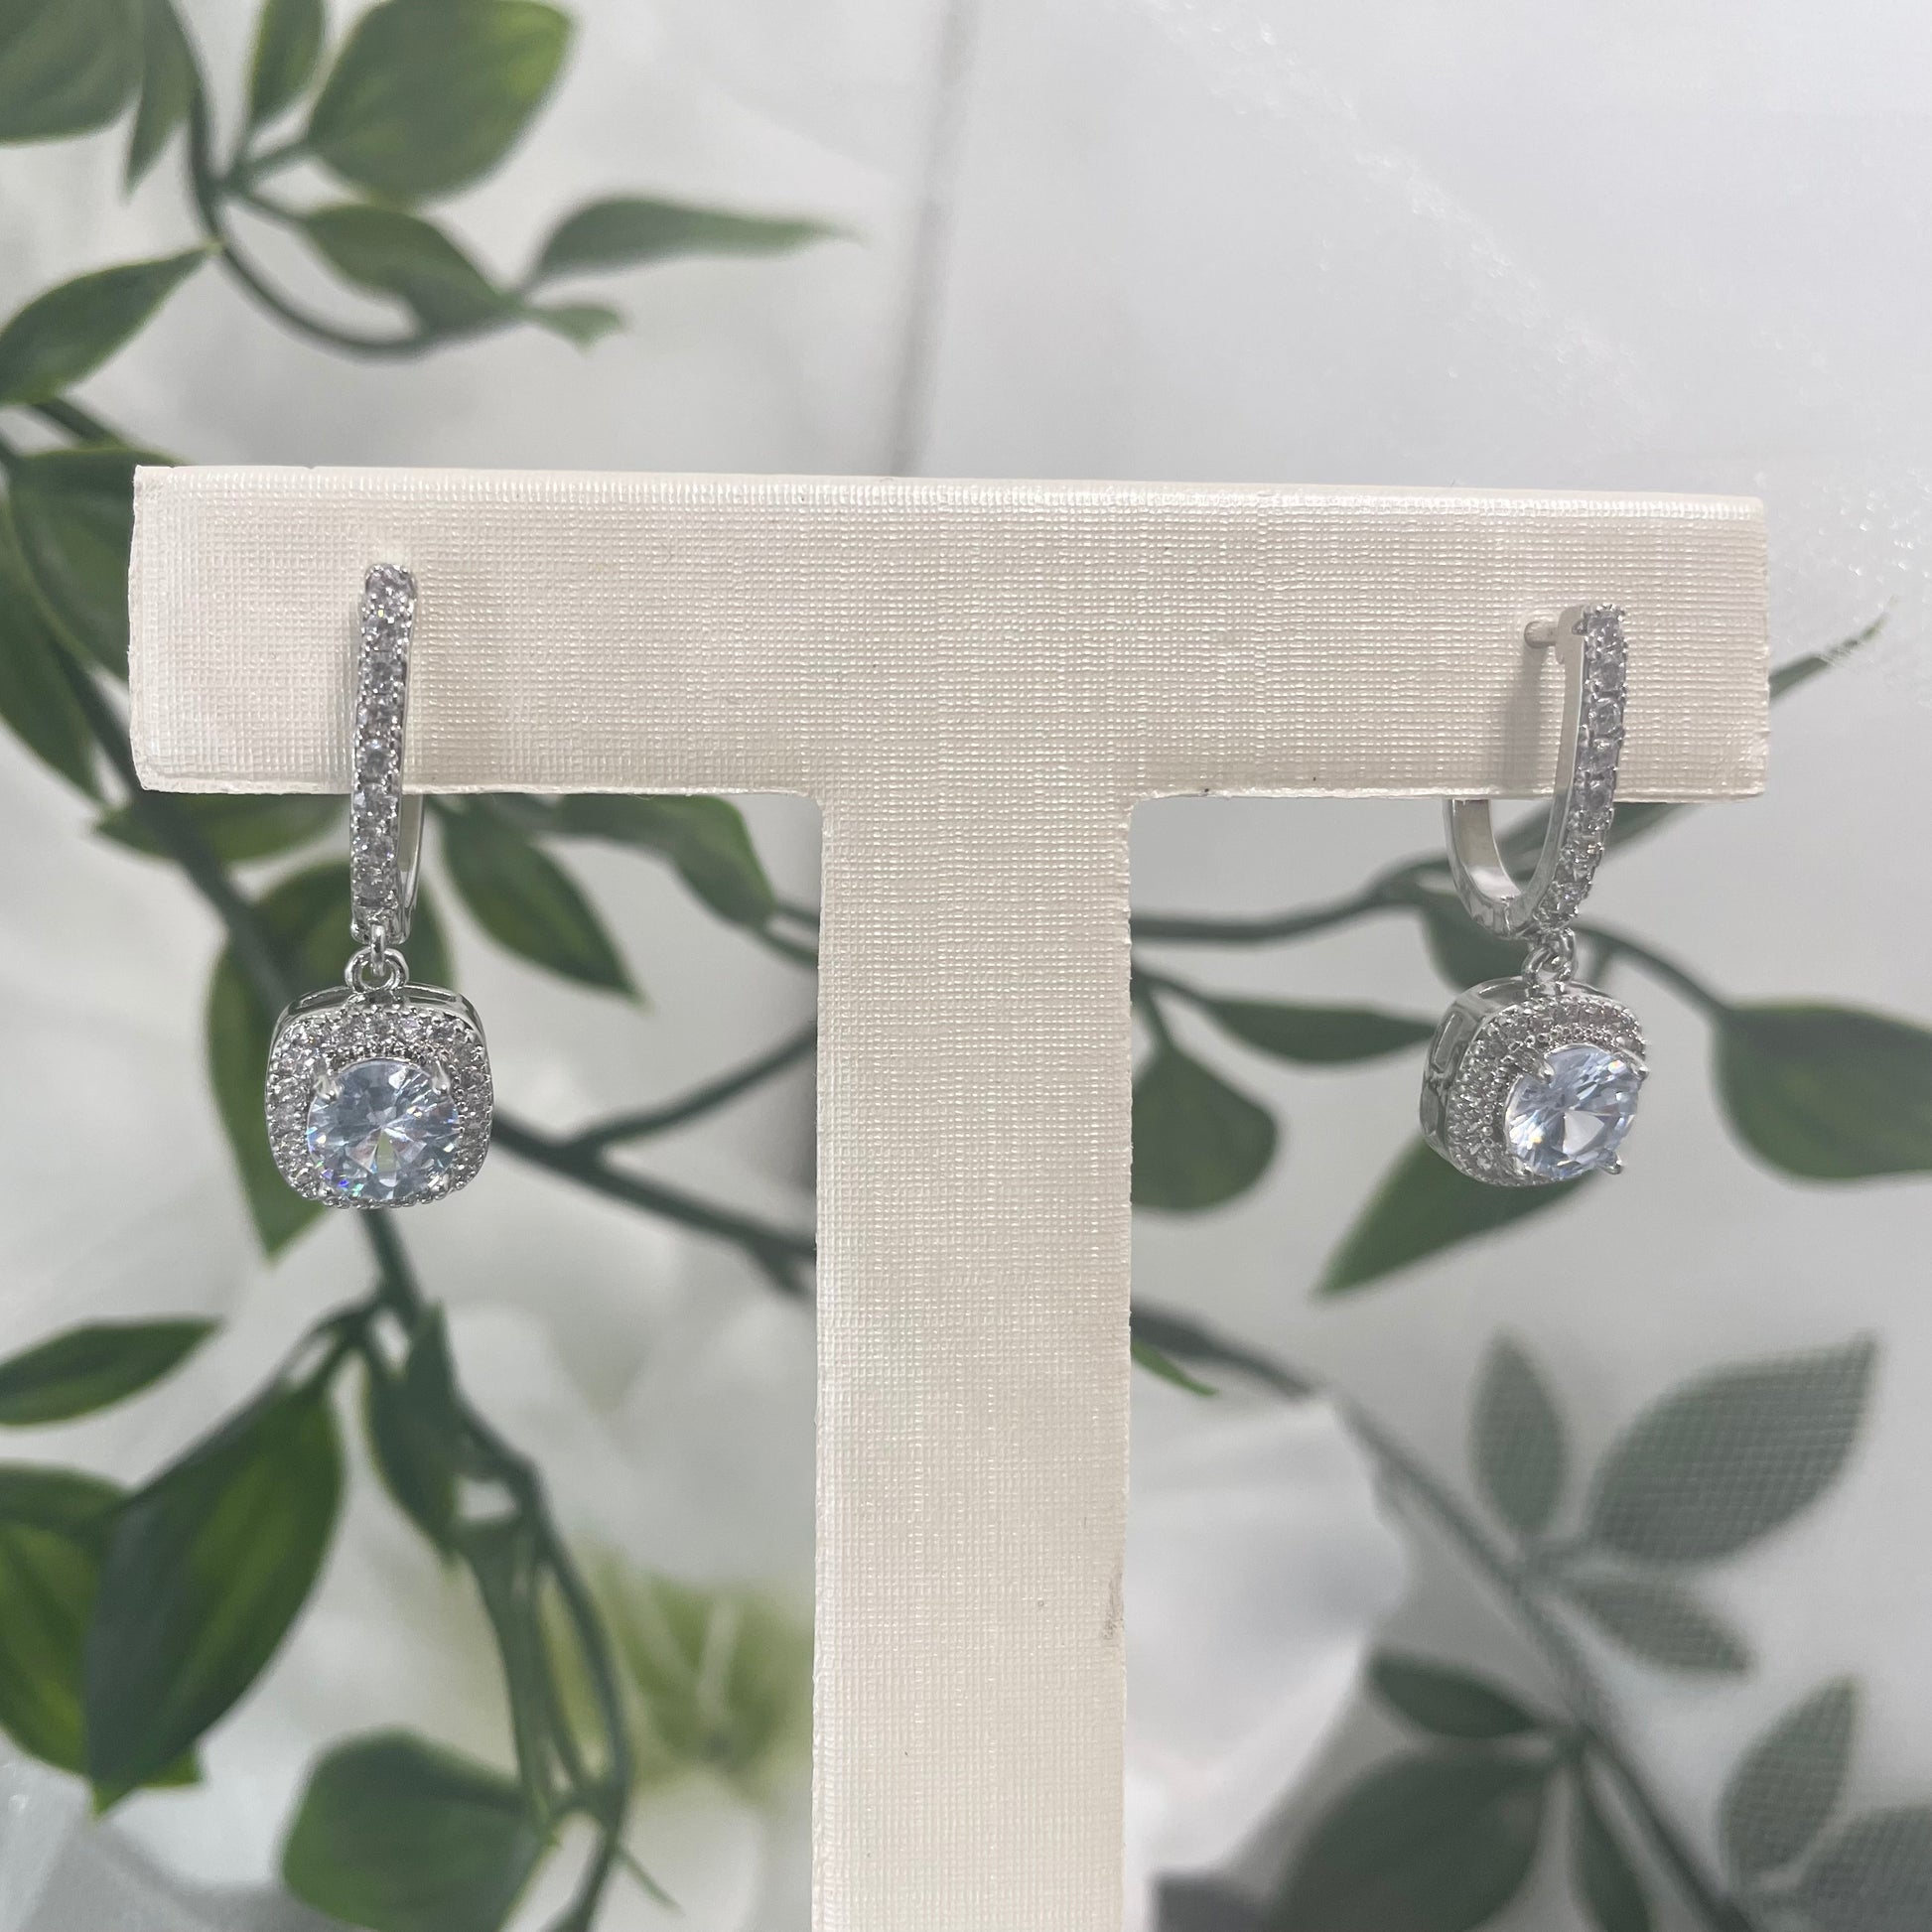 Alana Bridal Crystal Earrings with cubic zirconia, delicate hoop, and square pendant from Divine Bridal.